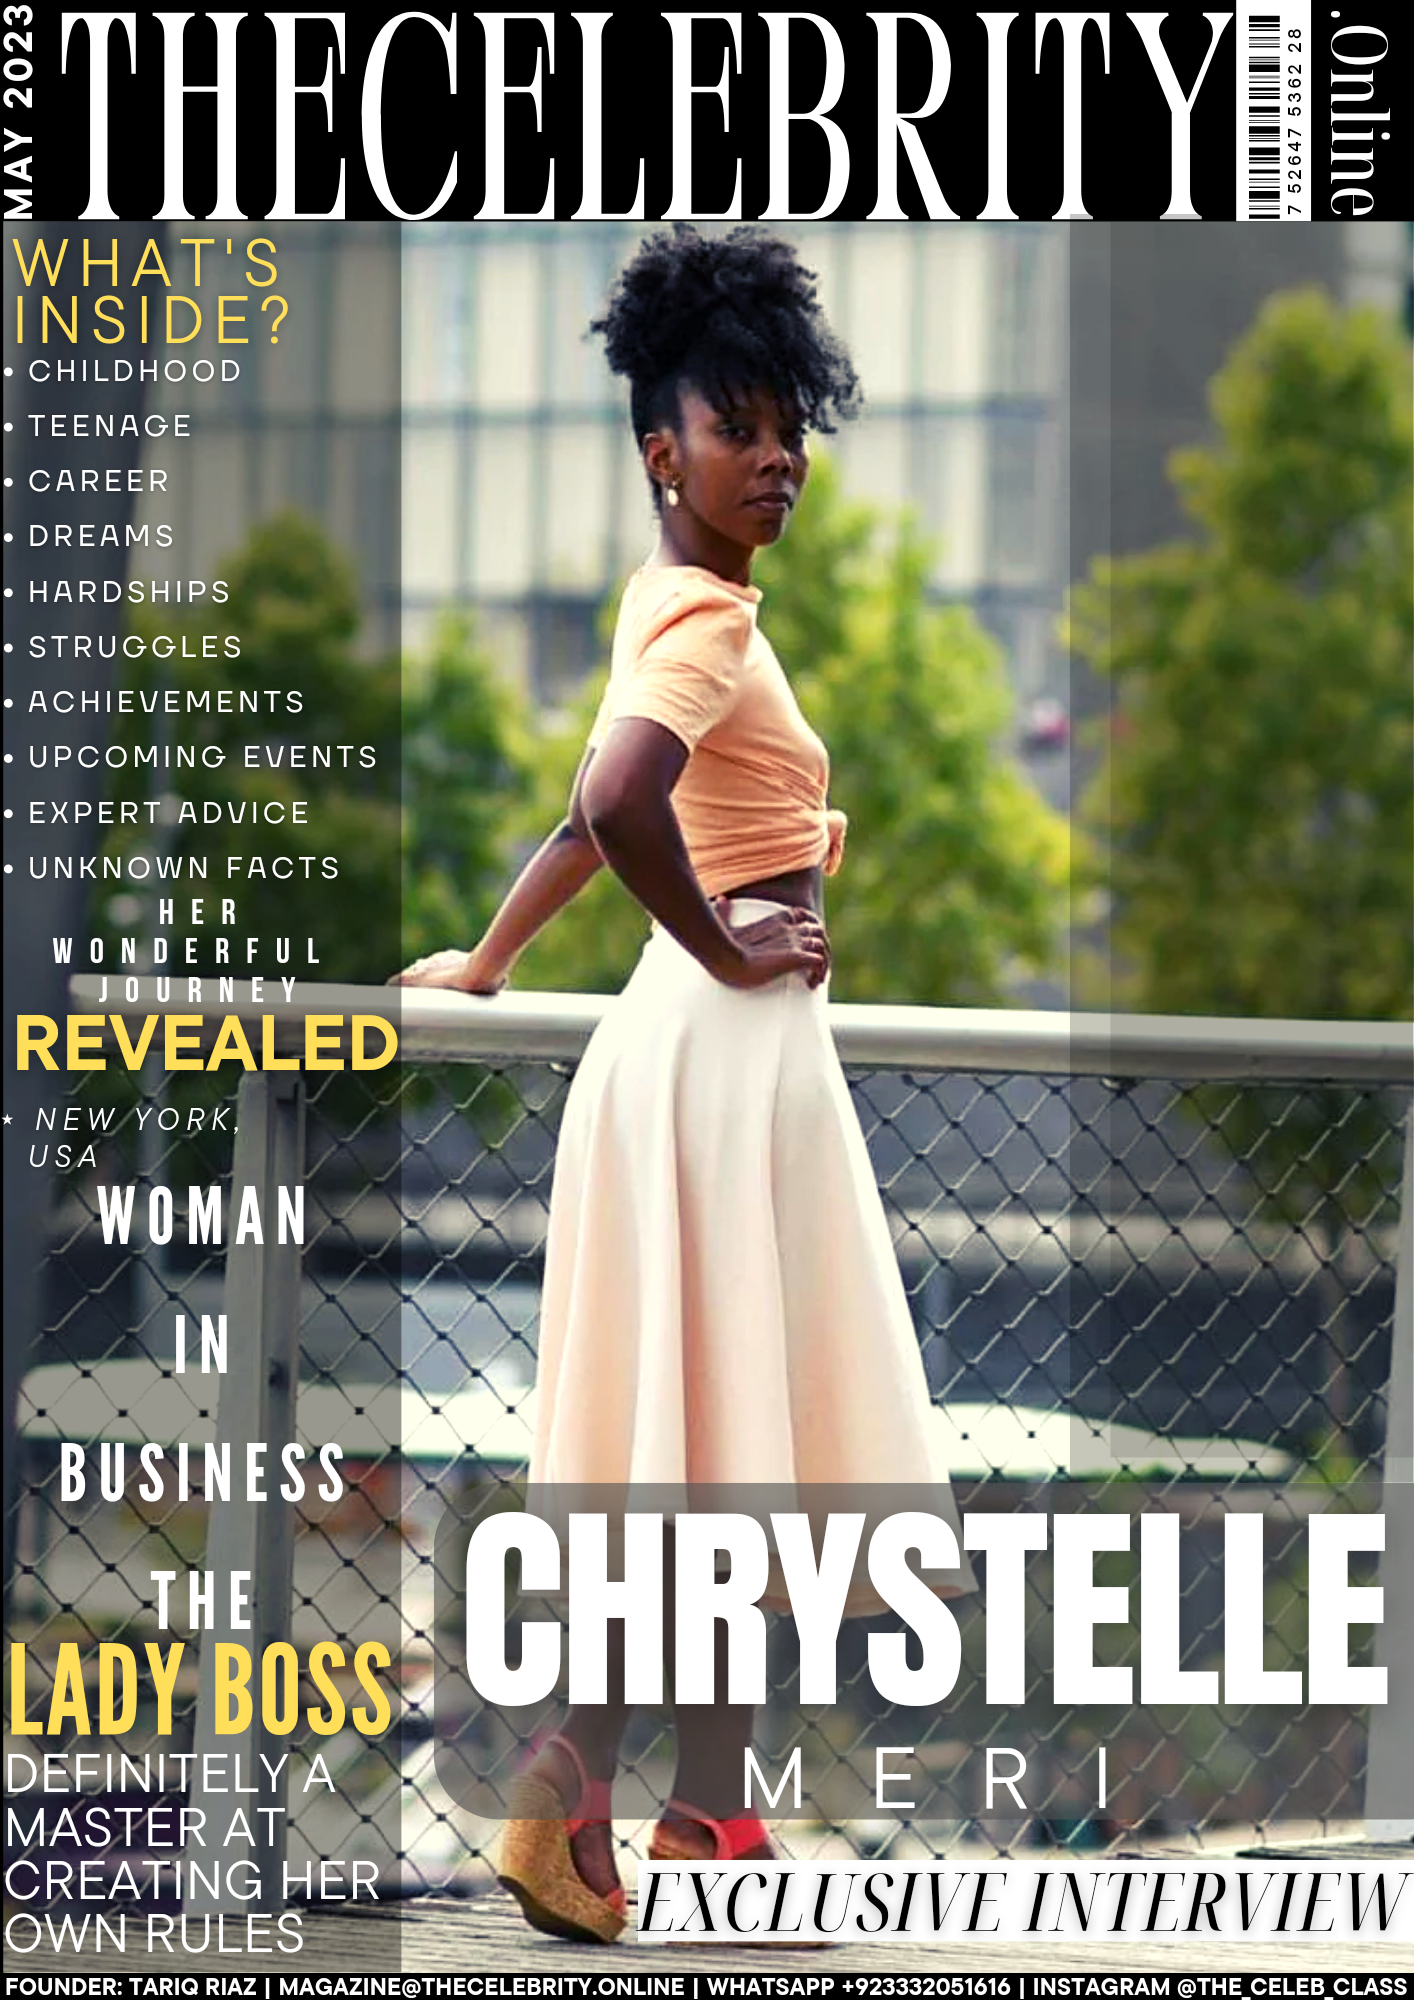 Chrystelle Meri Exclusive Interview – ‘Do Your Best To Stay Healthy, And Love Yourself’